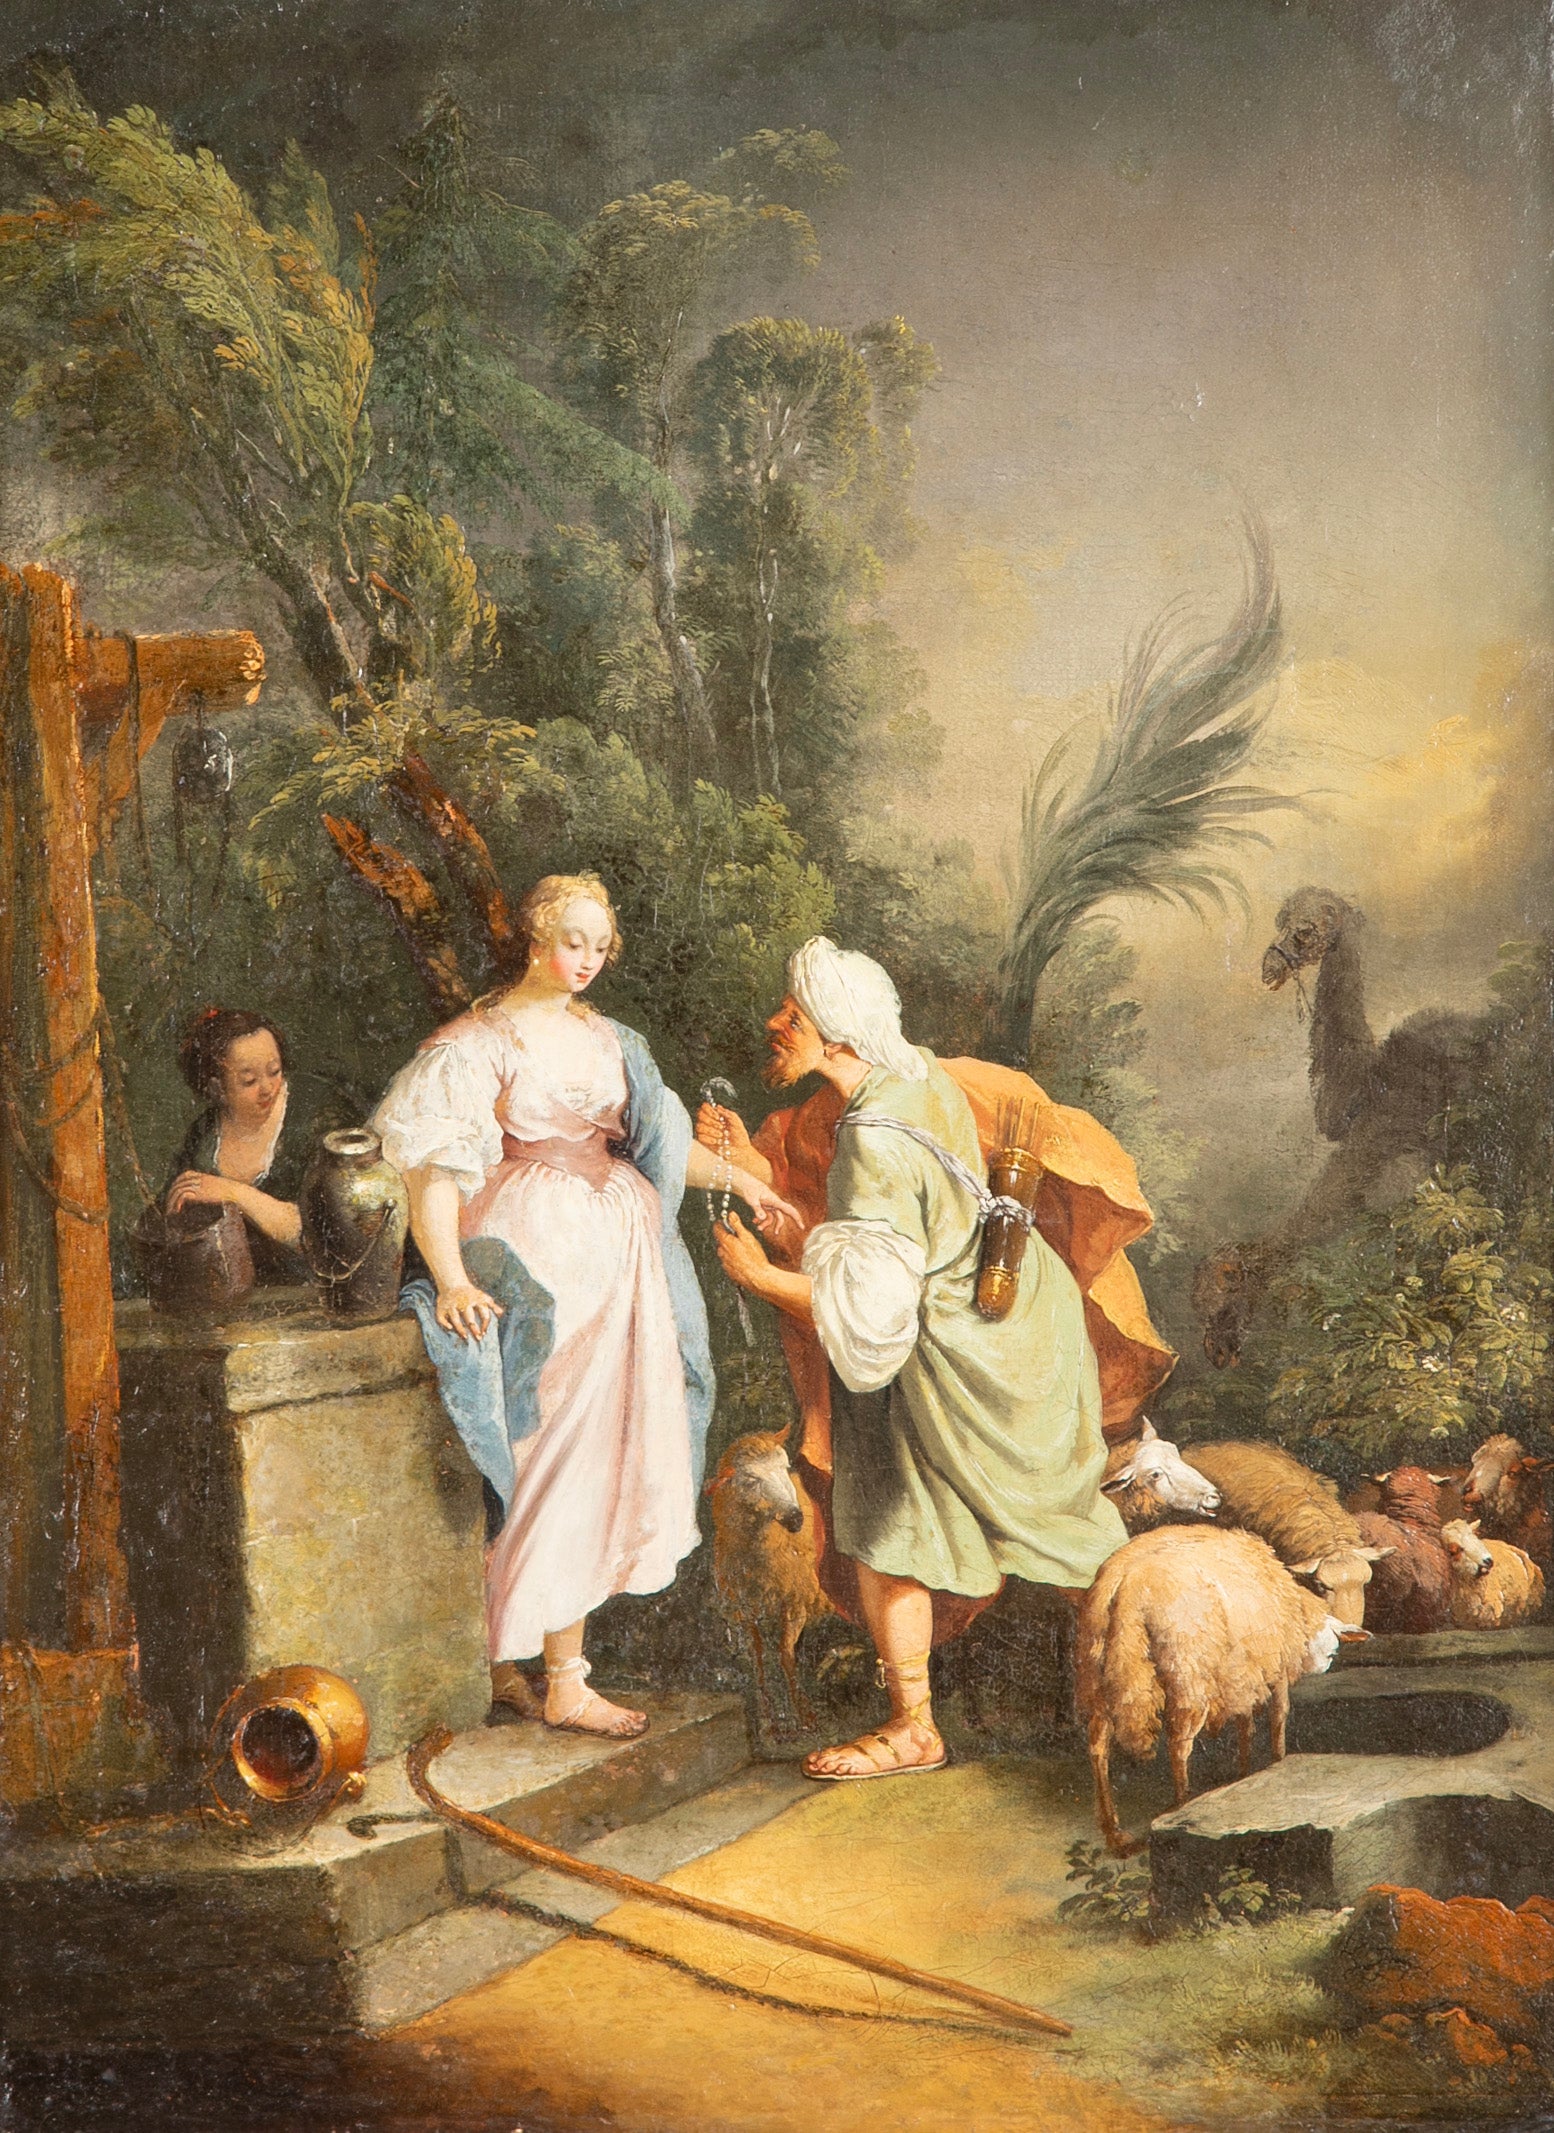 "Rebekah at the Well" a Late 19th Century French Oil on Canvas